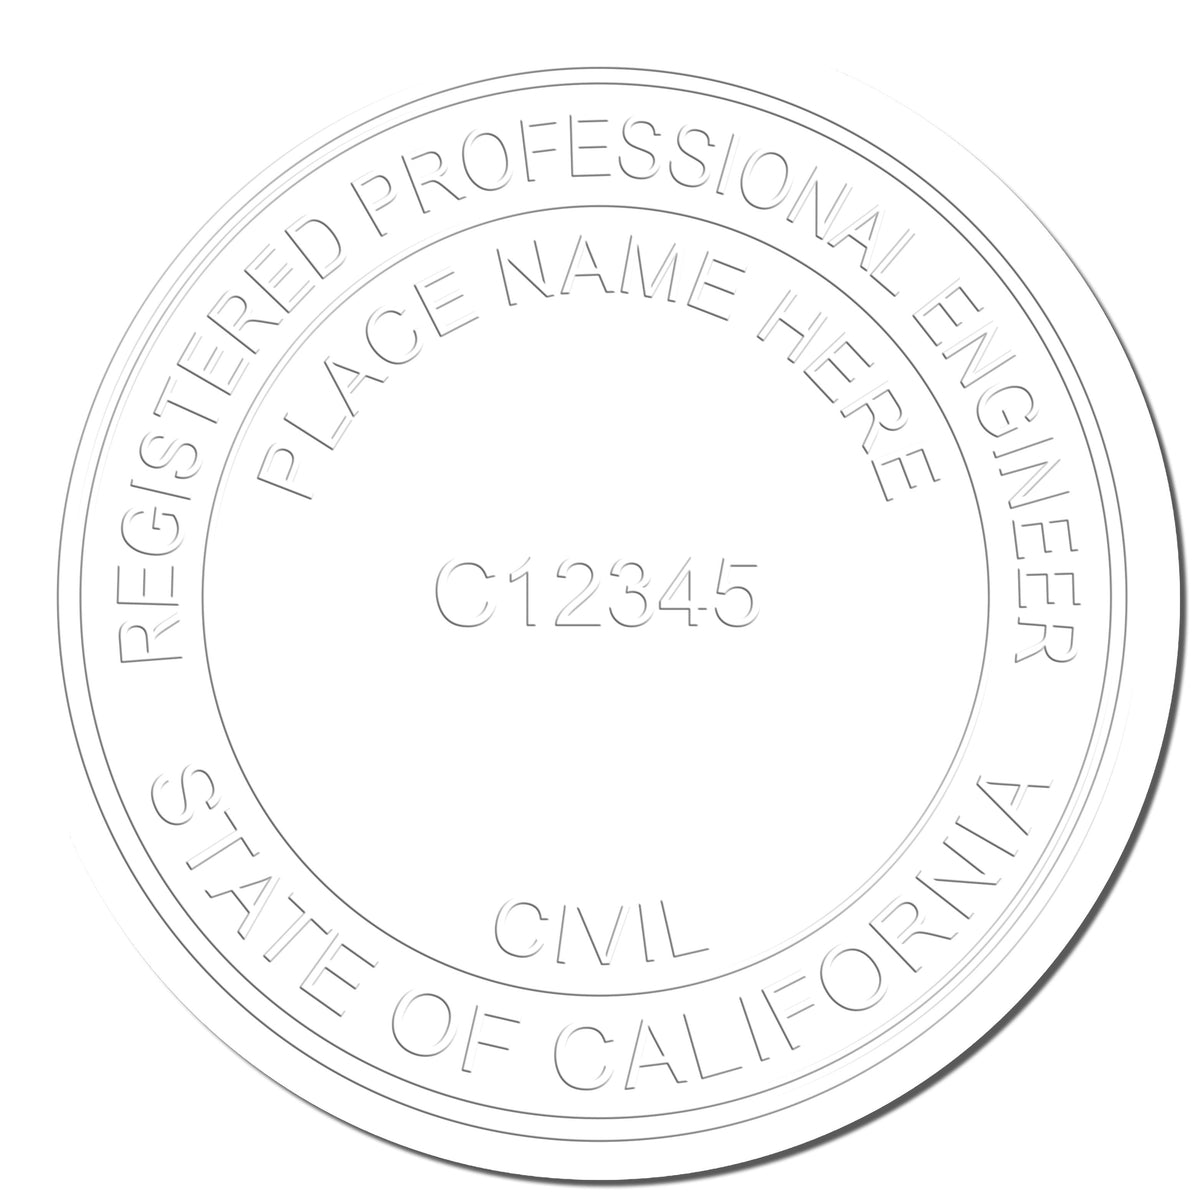 The Long Reach California PE Seal stamp impression comes to life with a crisp, detailed photo on paper - showcasing true professional quality.